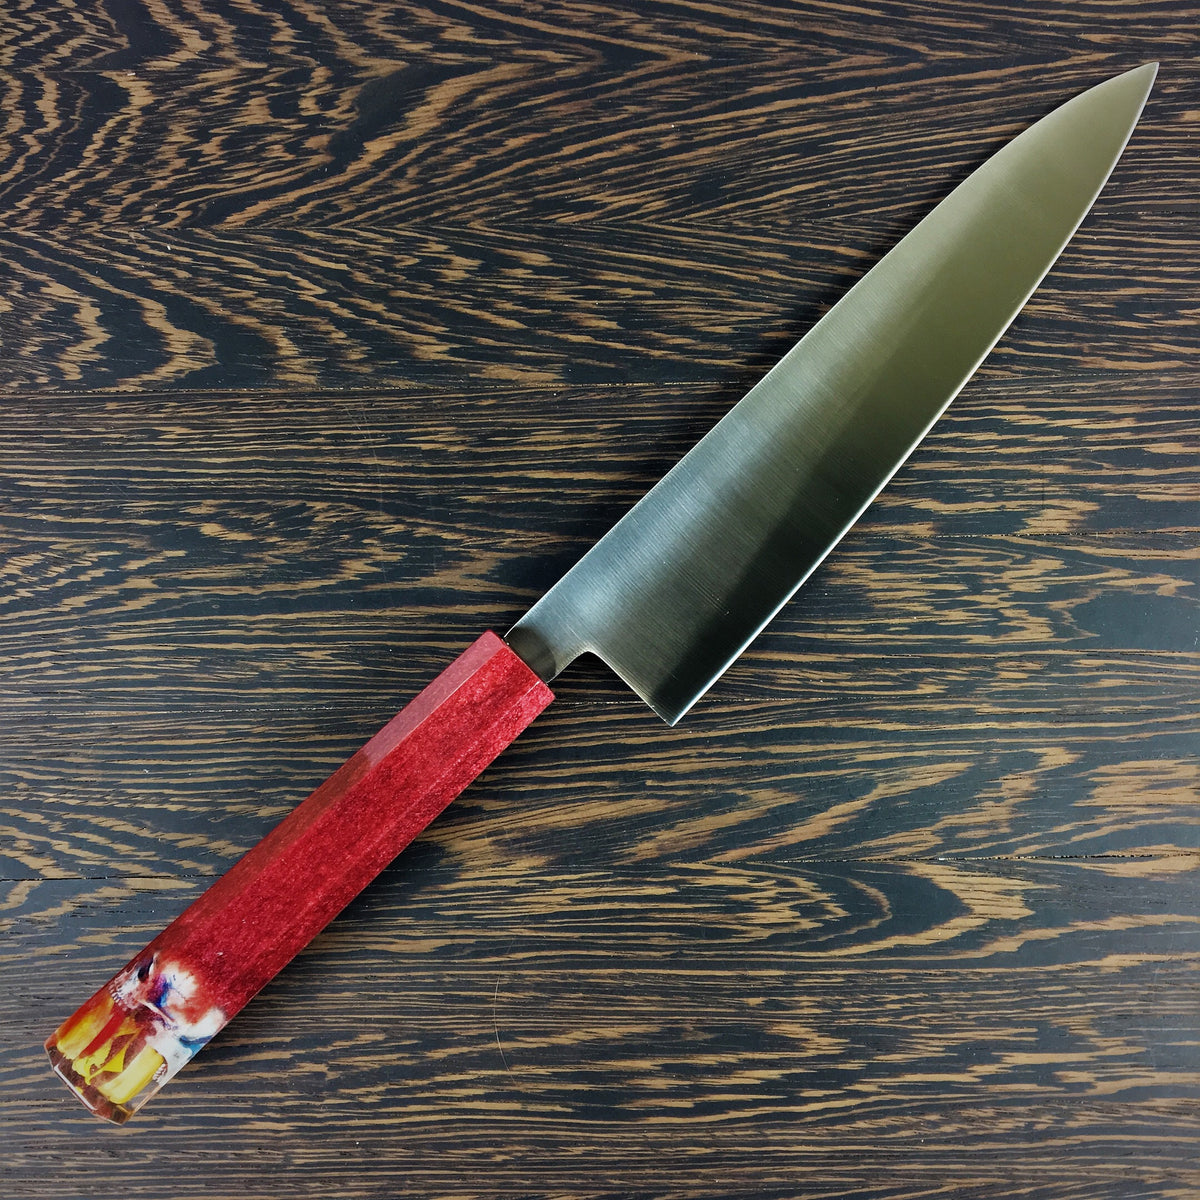 Randy Bobandy, Not even death could keep him from pounding cheeseburgers - 210mm (8.25in) Gyuto Chef Knife